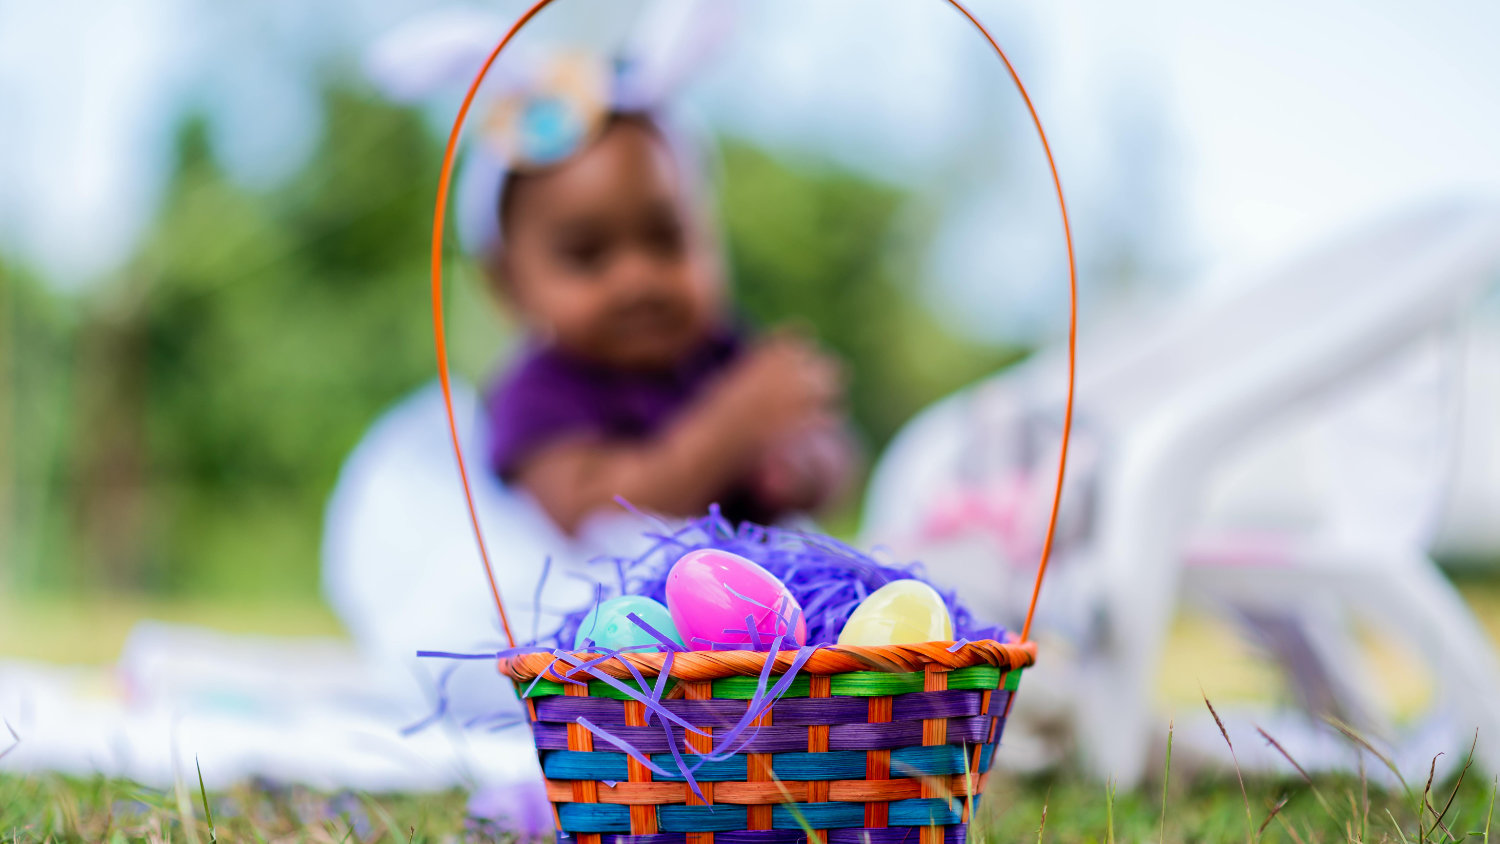 Easter basket with little girl in the background.